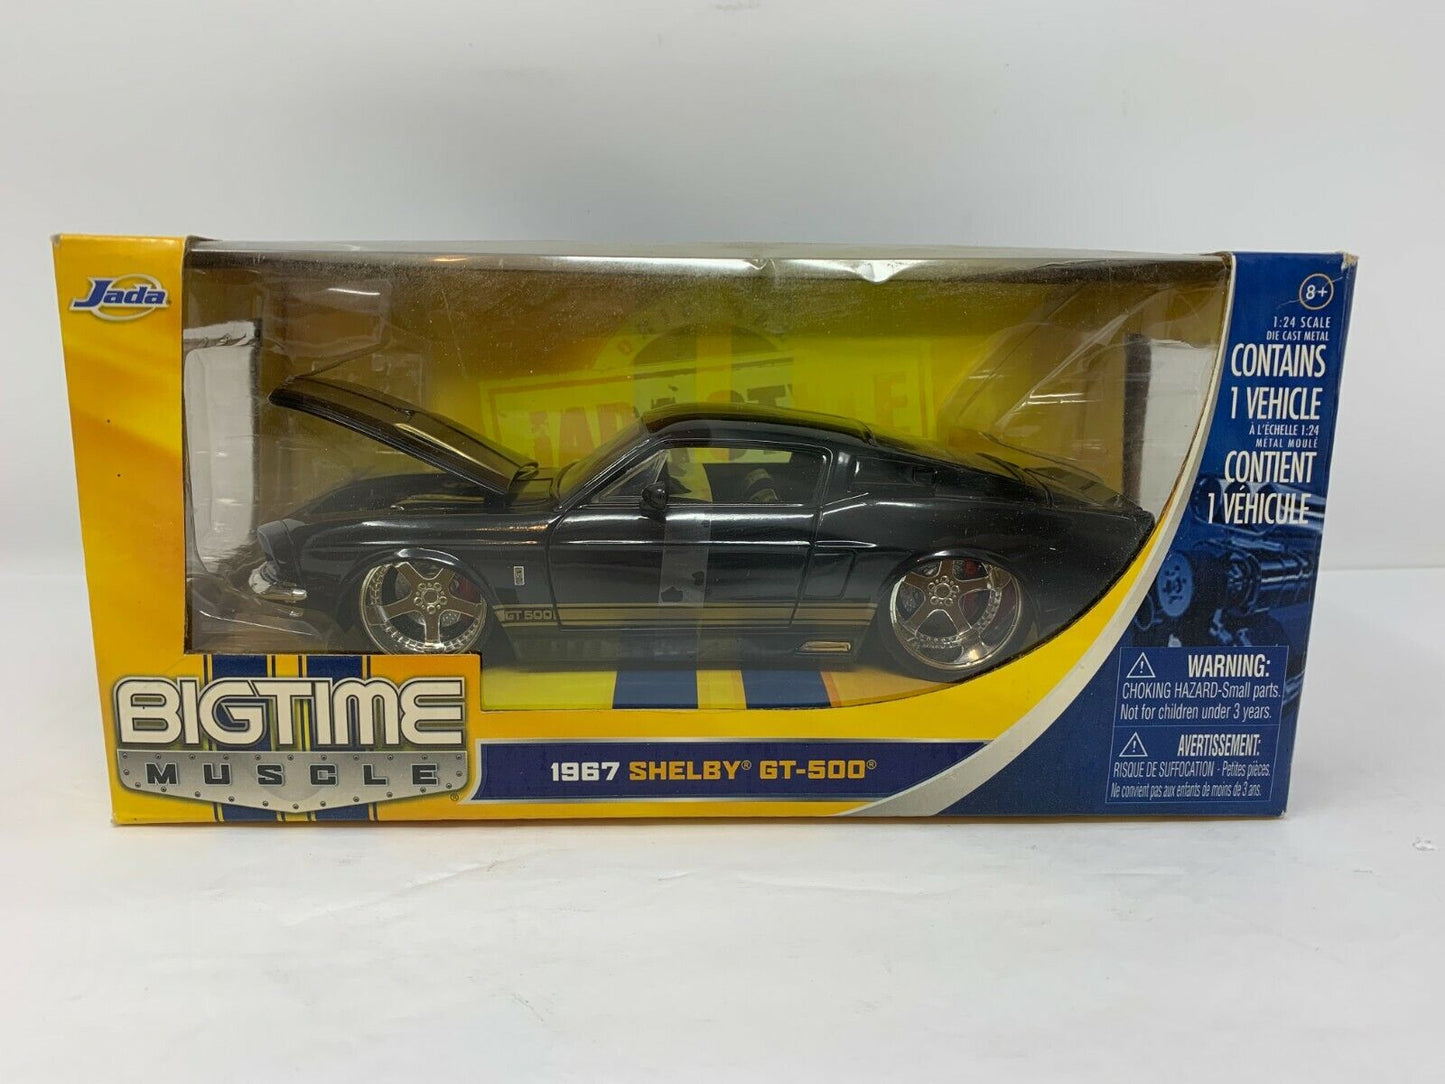 Jada Bigtime Muscle 1967 Shelby GT-500 1:24 Diecast